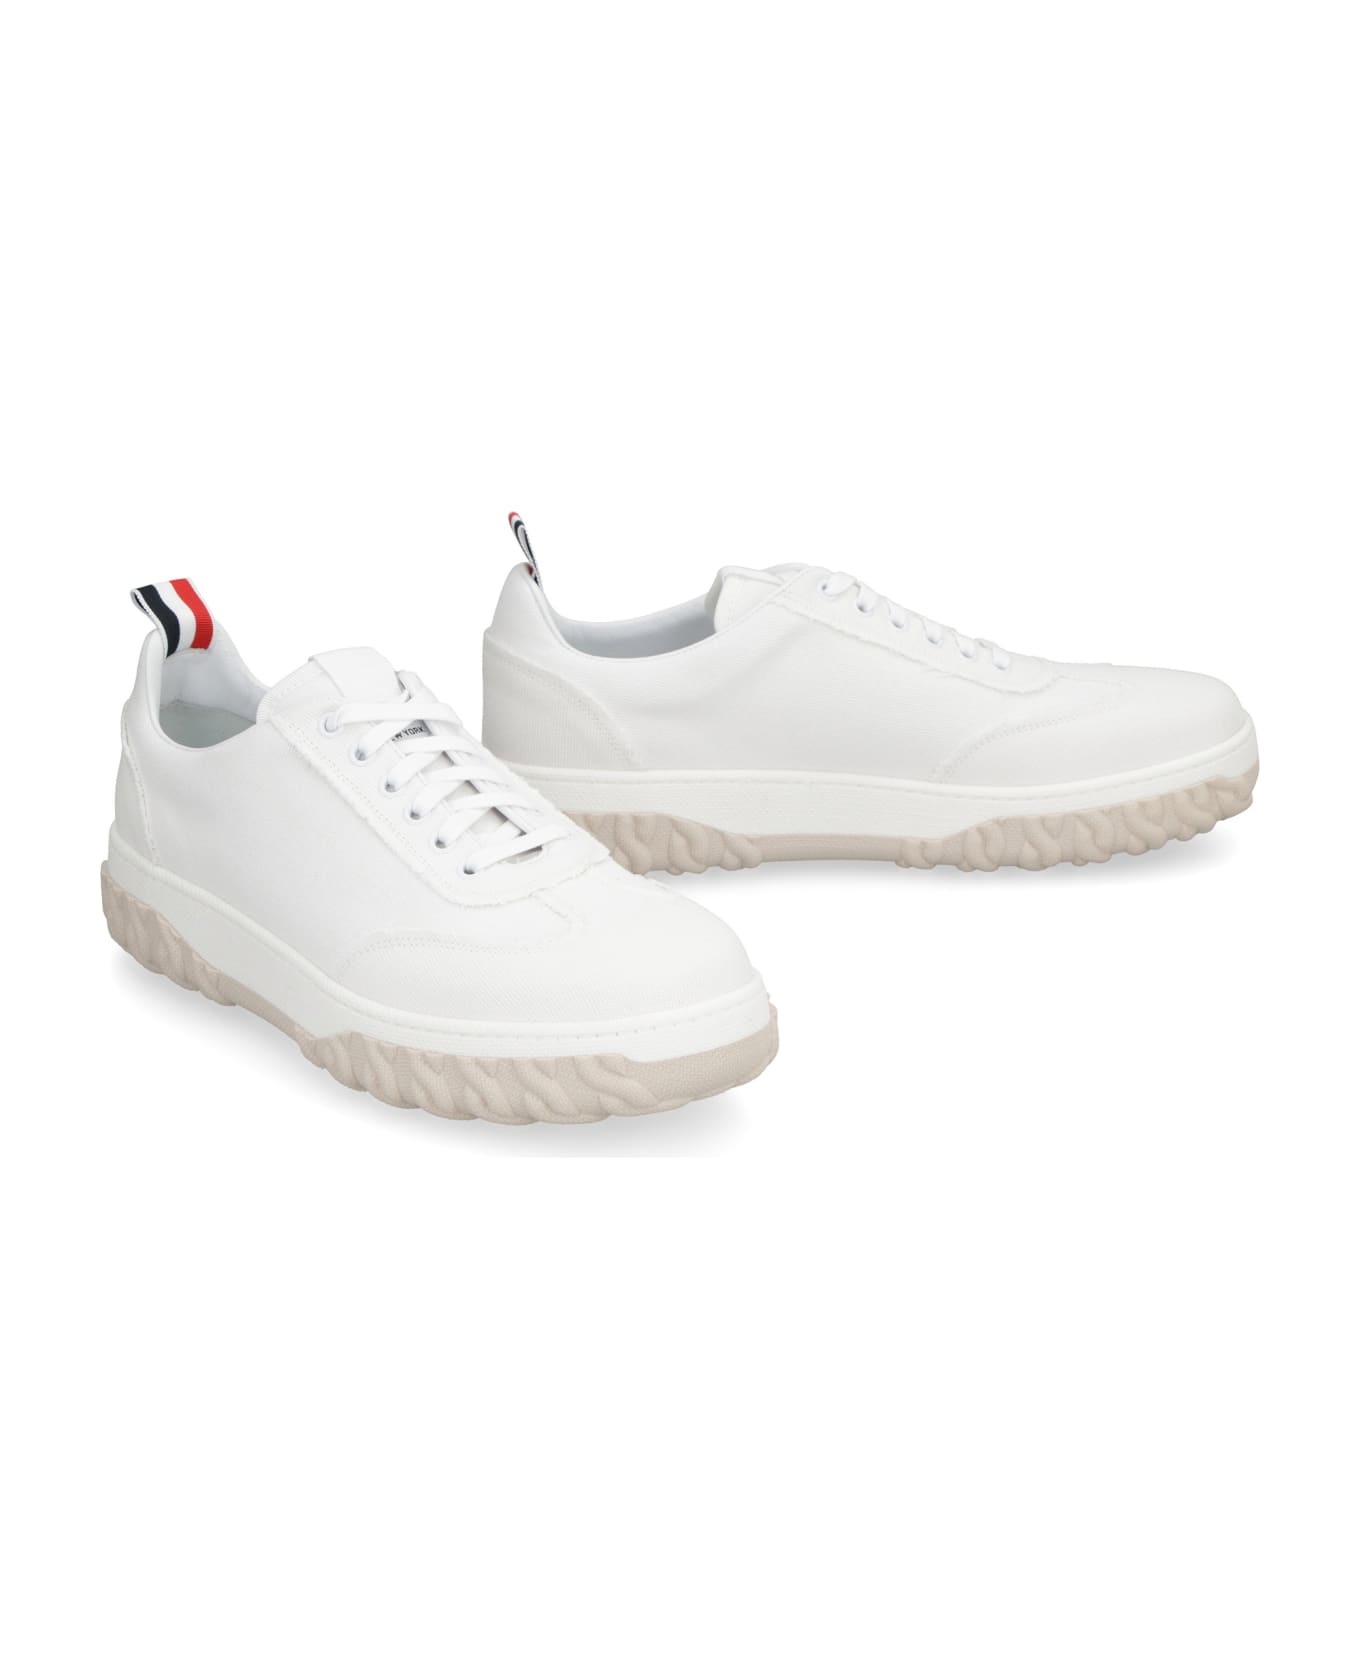 Thom Browne Field Canvas Sneakers - White